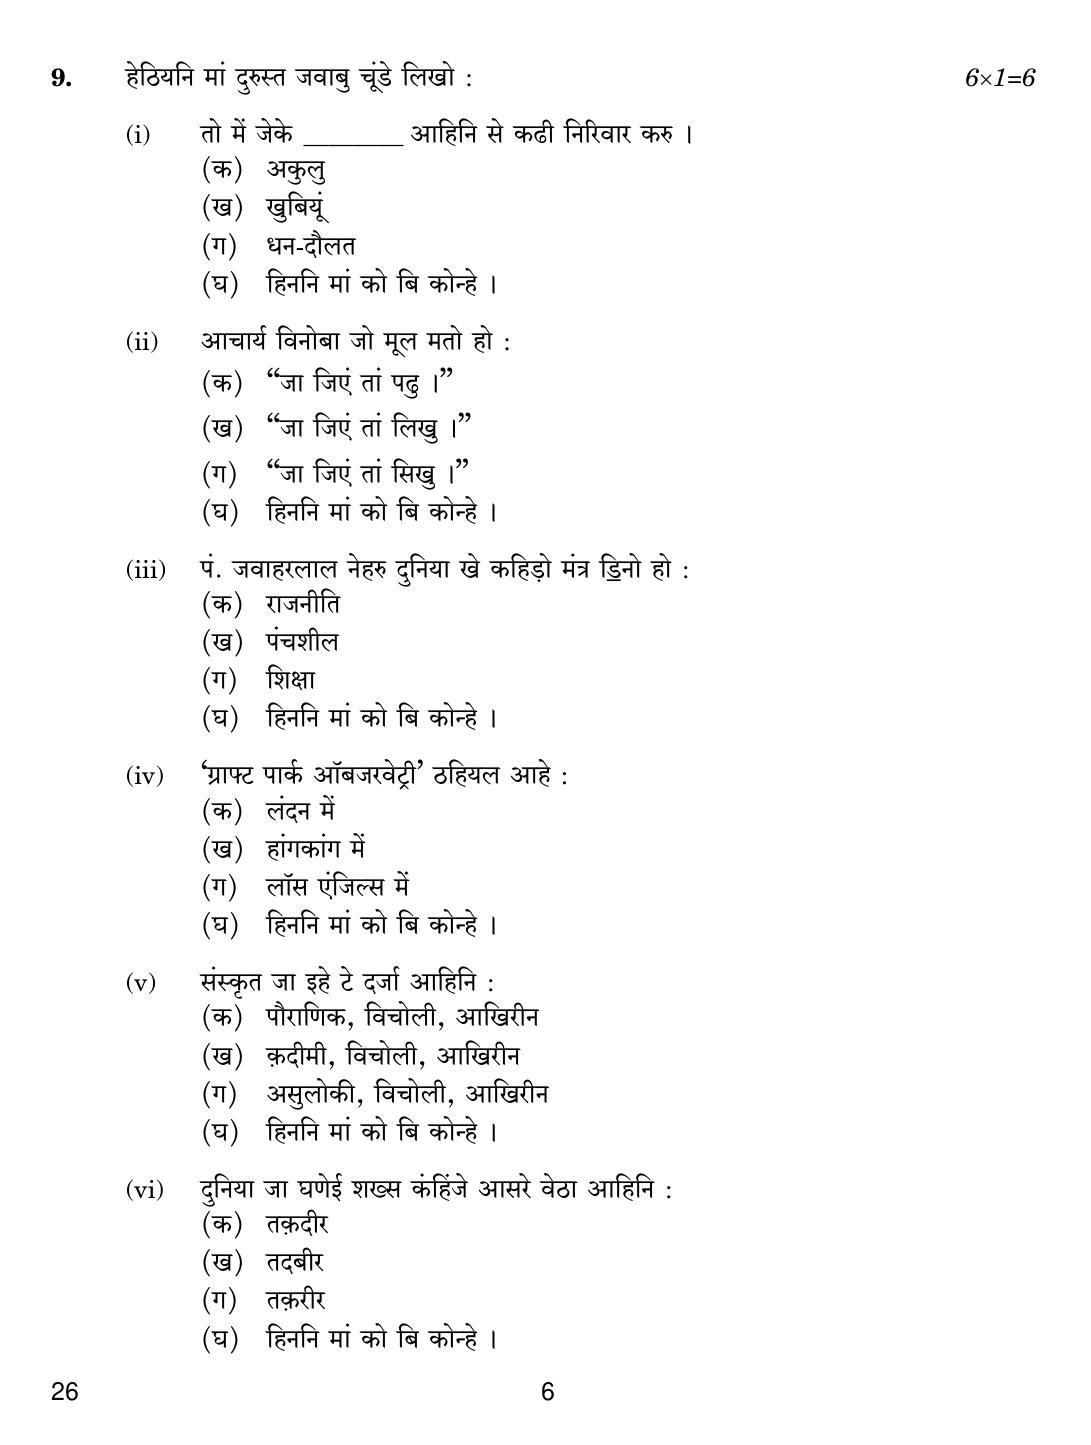 CBSE Class 10 26 SINDHI 2019 Question Paper - Page 6